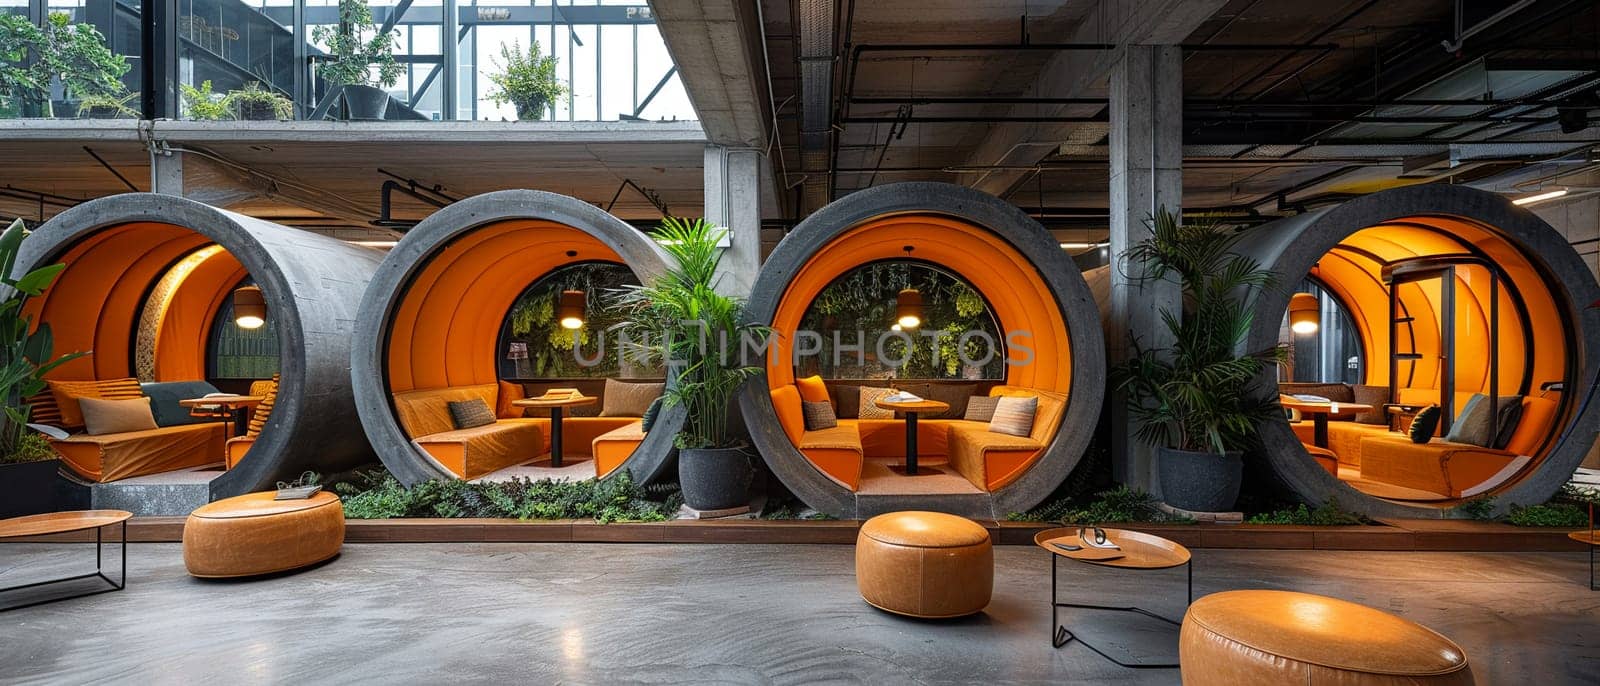 Tech startup office with open workspaces and relaxation pods.